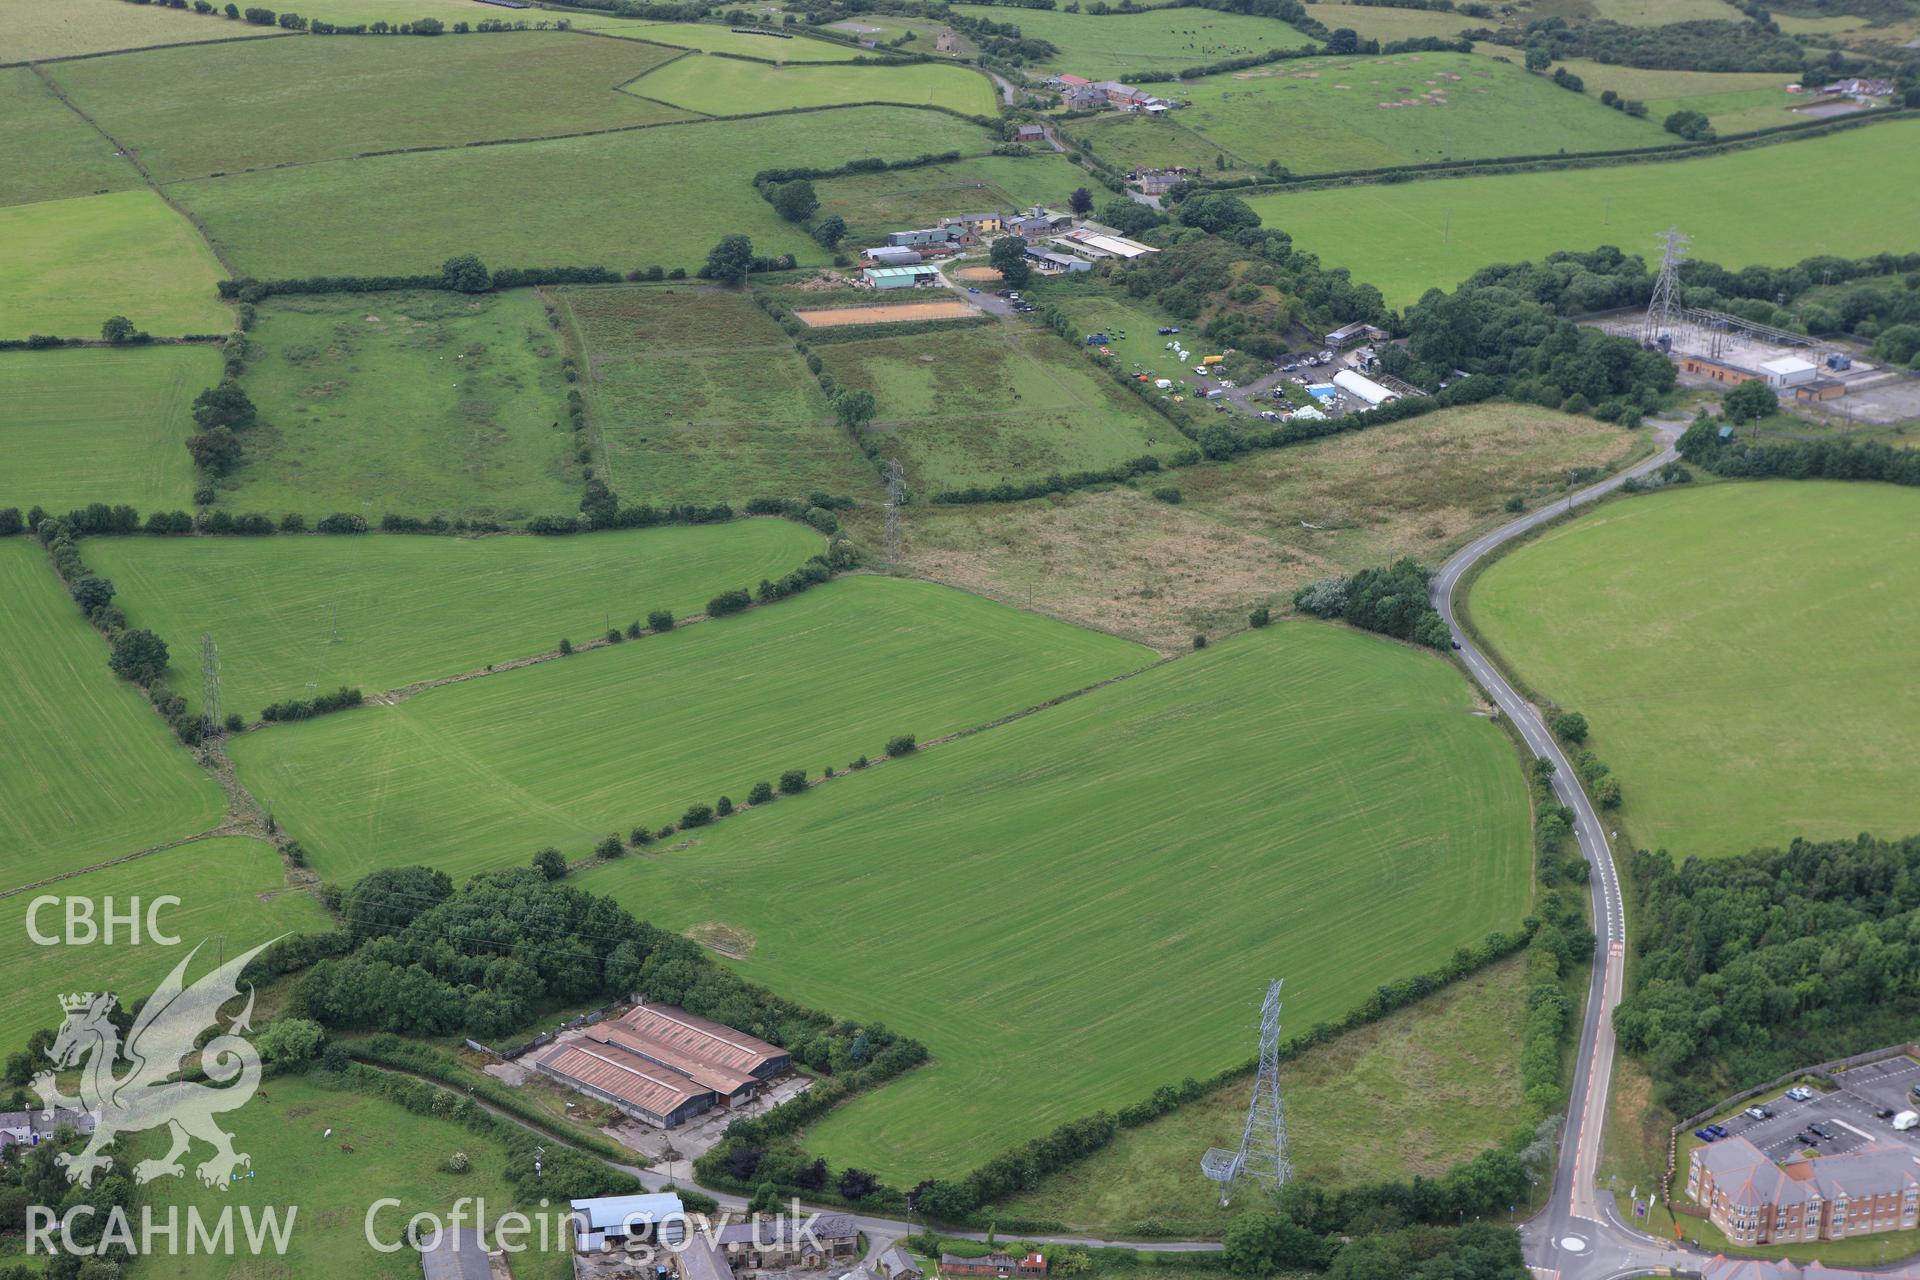 RCAHMW colour oblique aerial photograph of Offa's Dyke, viewed from the south-east. Taken on 08 July 2009 by Toby Driver